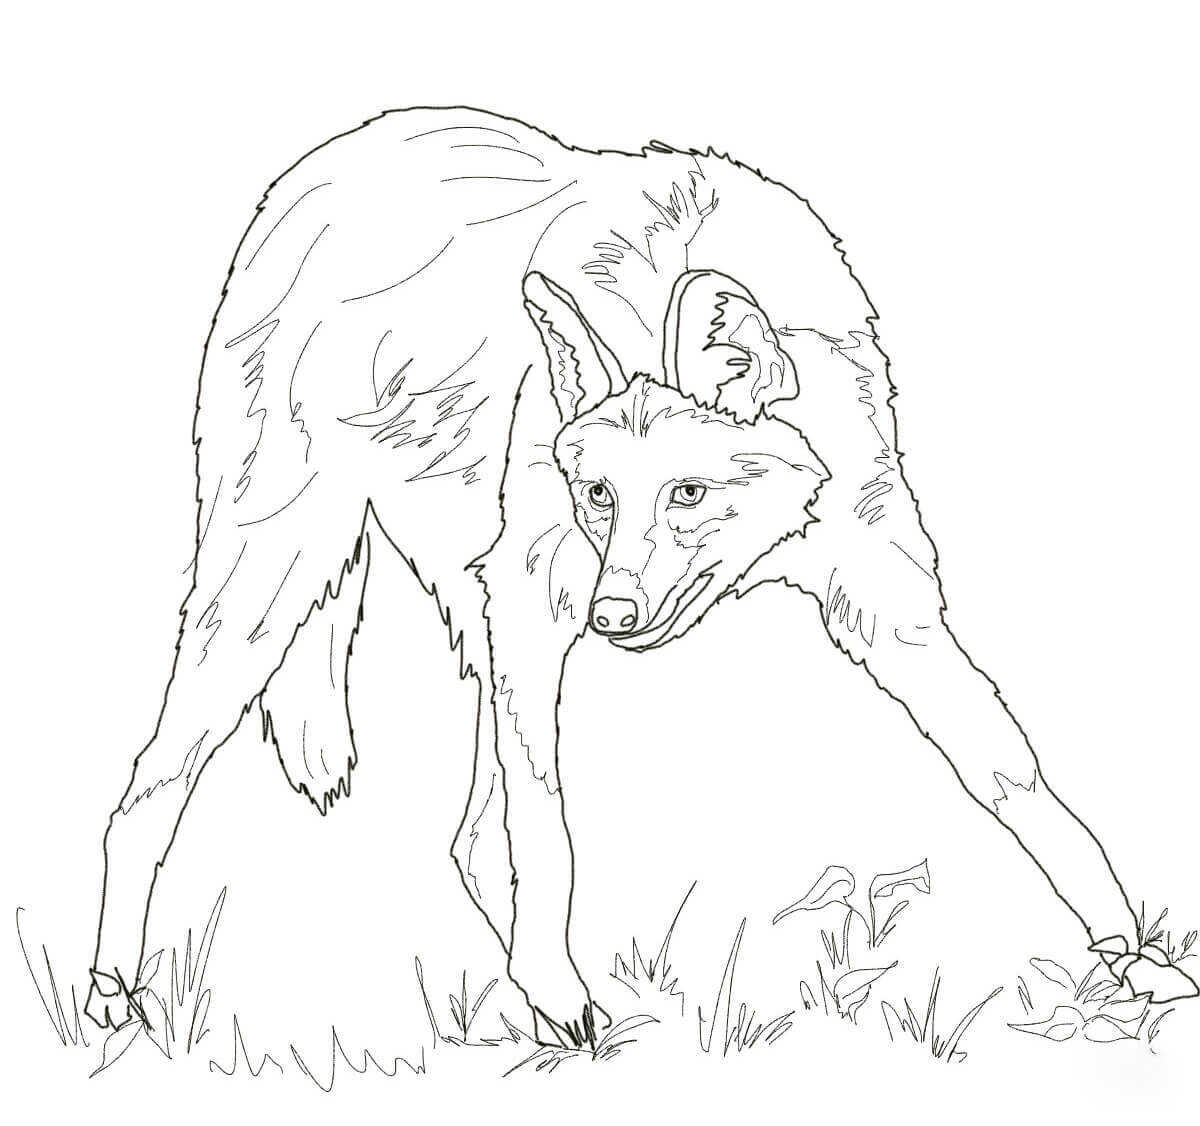 Maned Wolf has long black legs and tall, erect ears Coloring Page